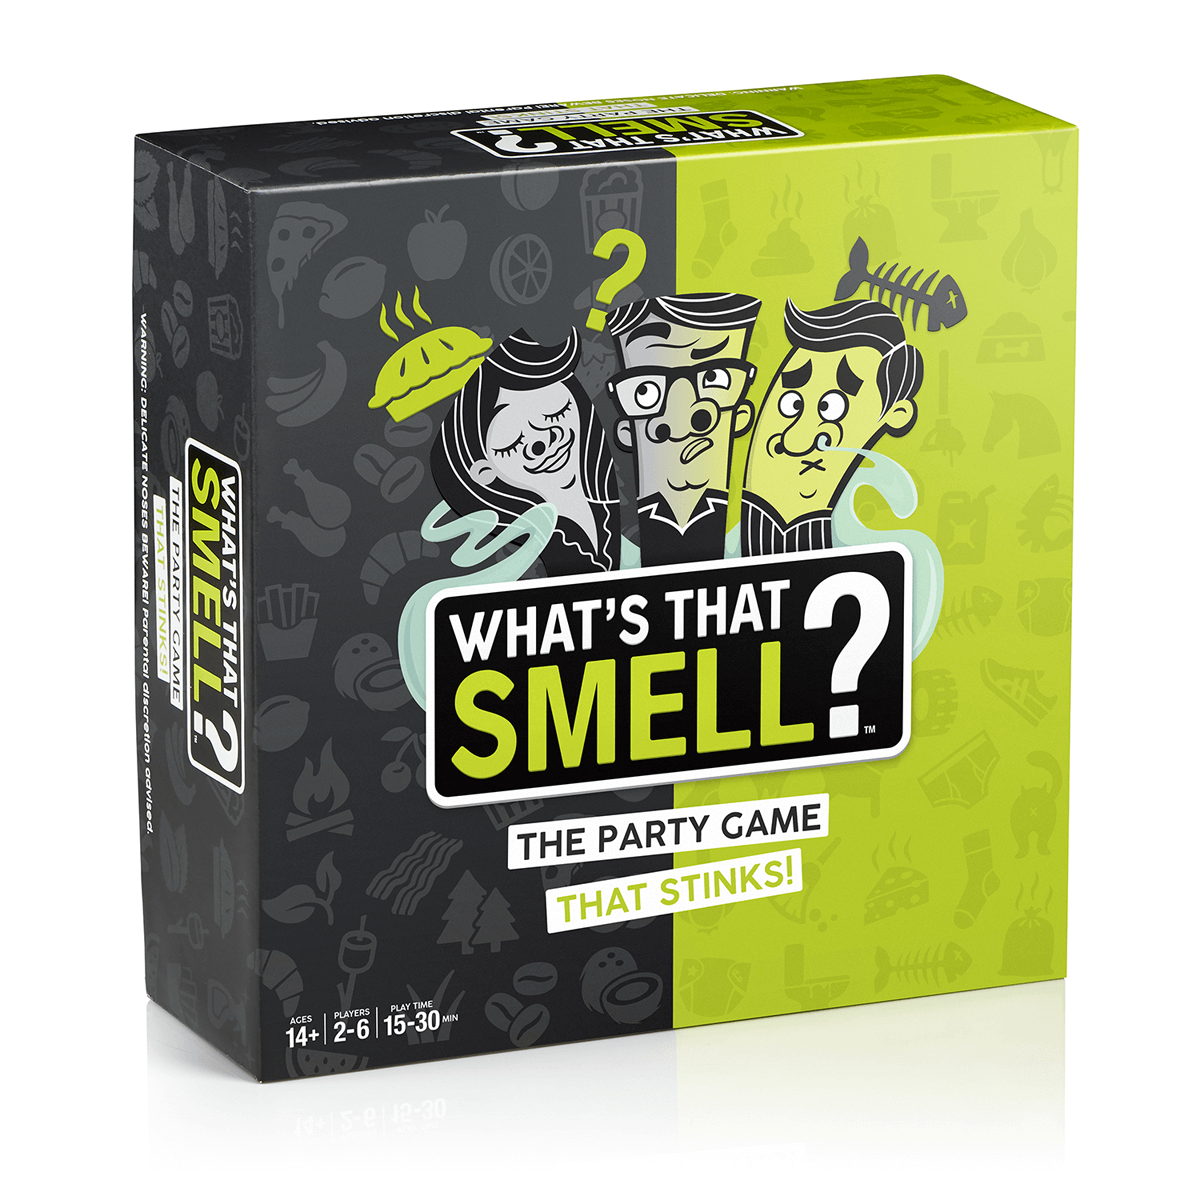  What's That Smell? The Party Game